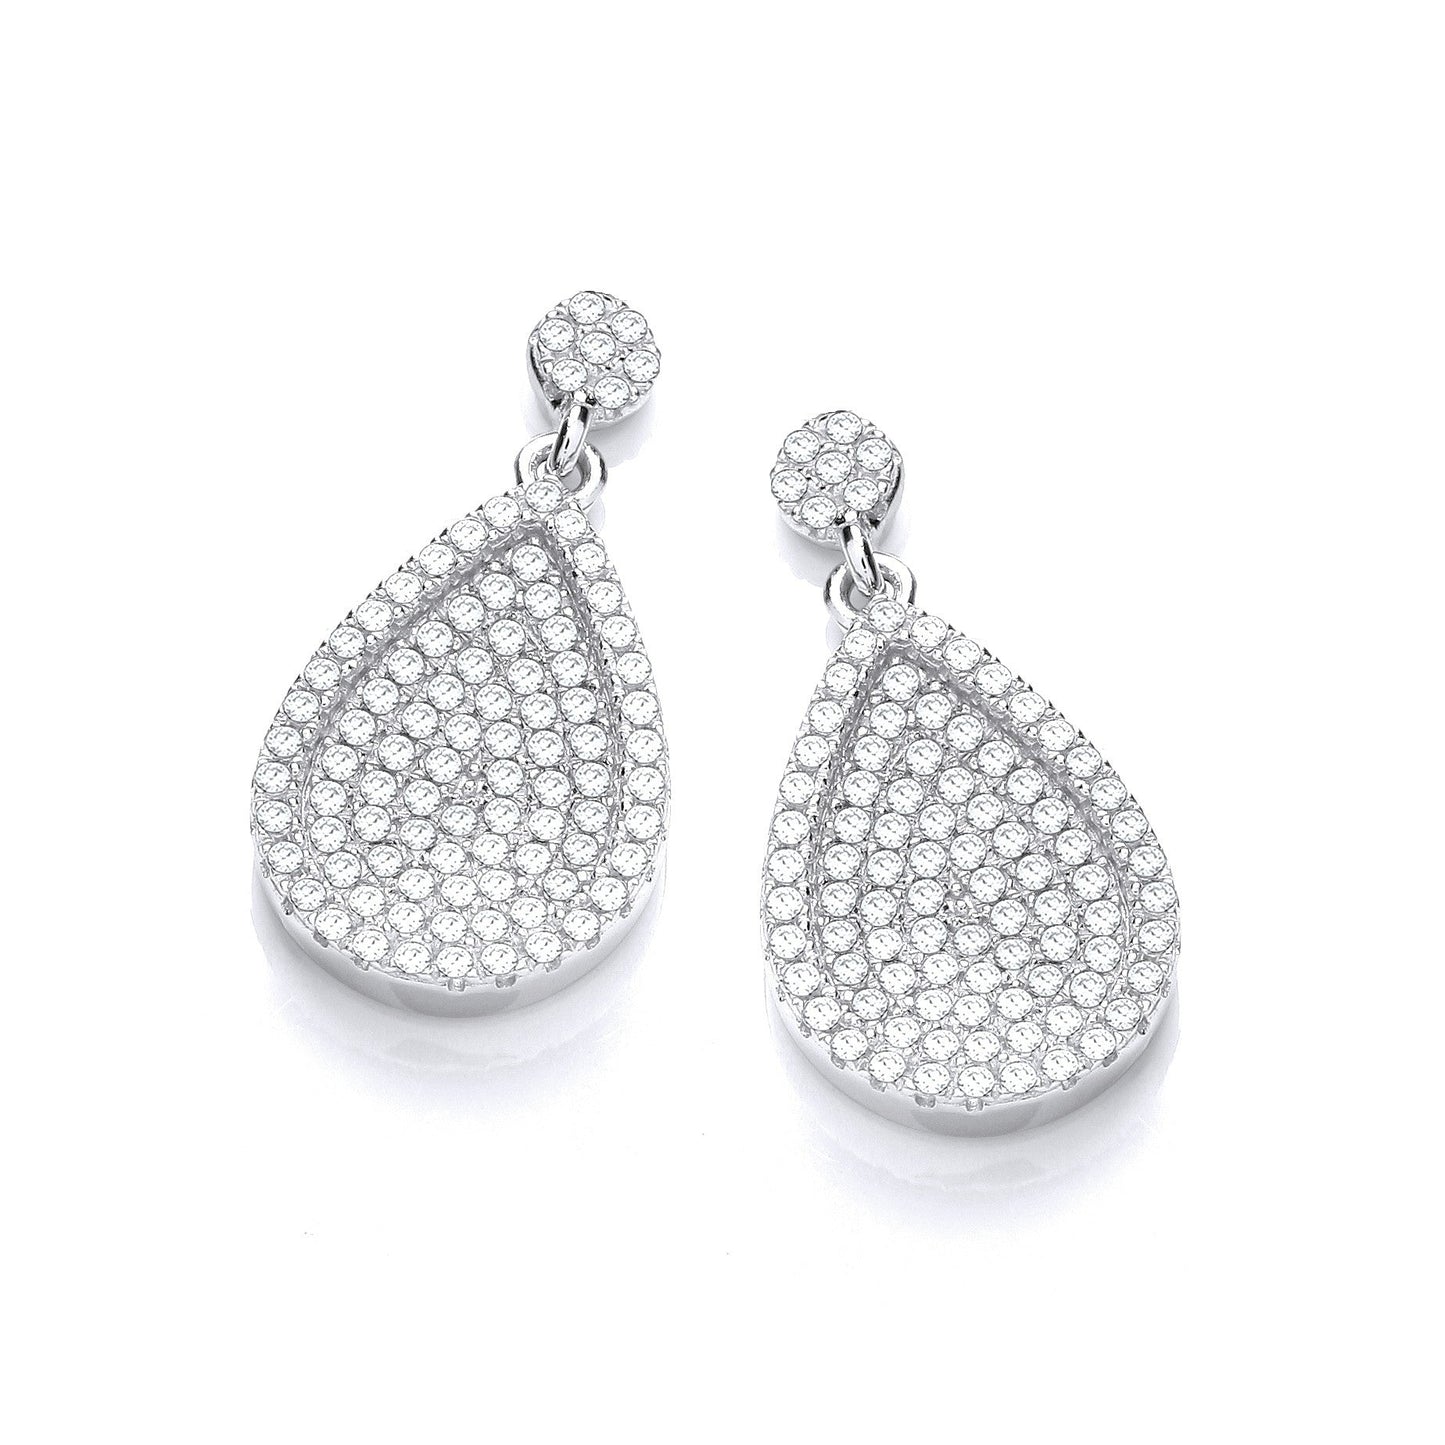 925 Sterling Silver Filled Drop Earrings Set With CZs - FJewellery